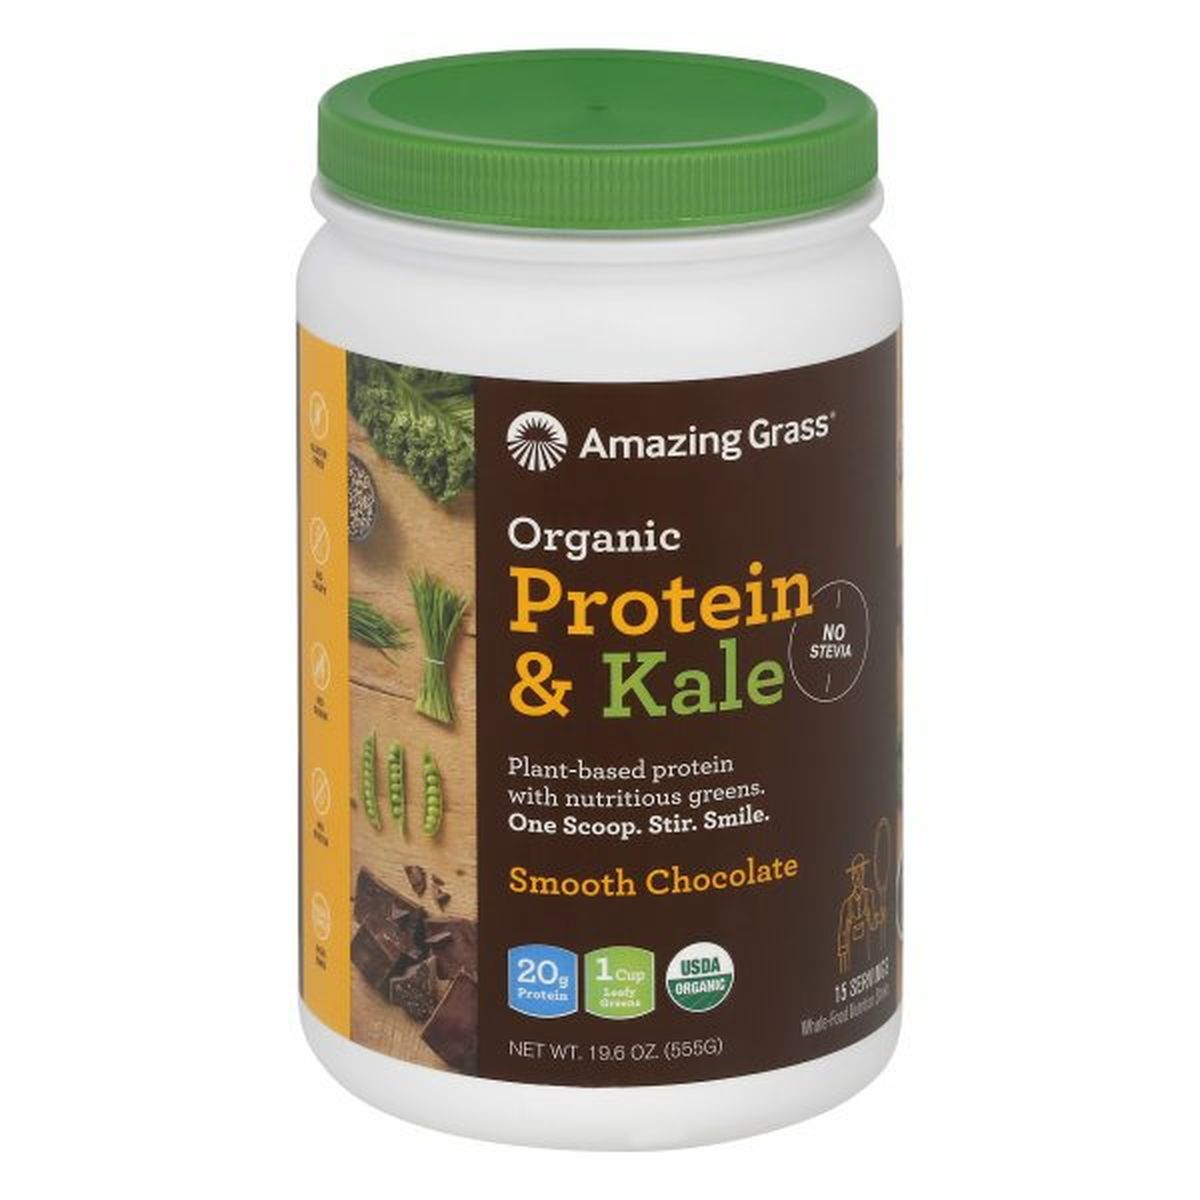 Calories in Amazing Grass Protein & Kale, Organic, Smooth Chocolate